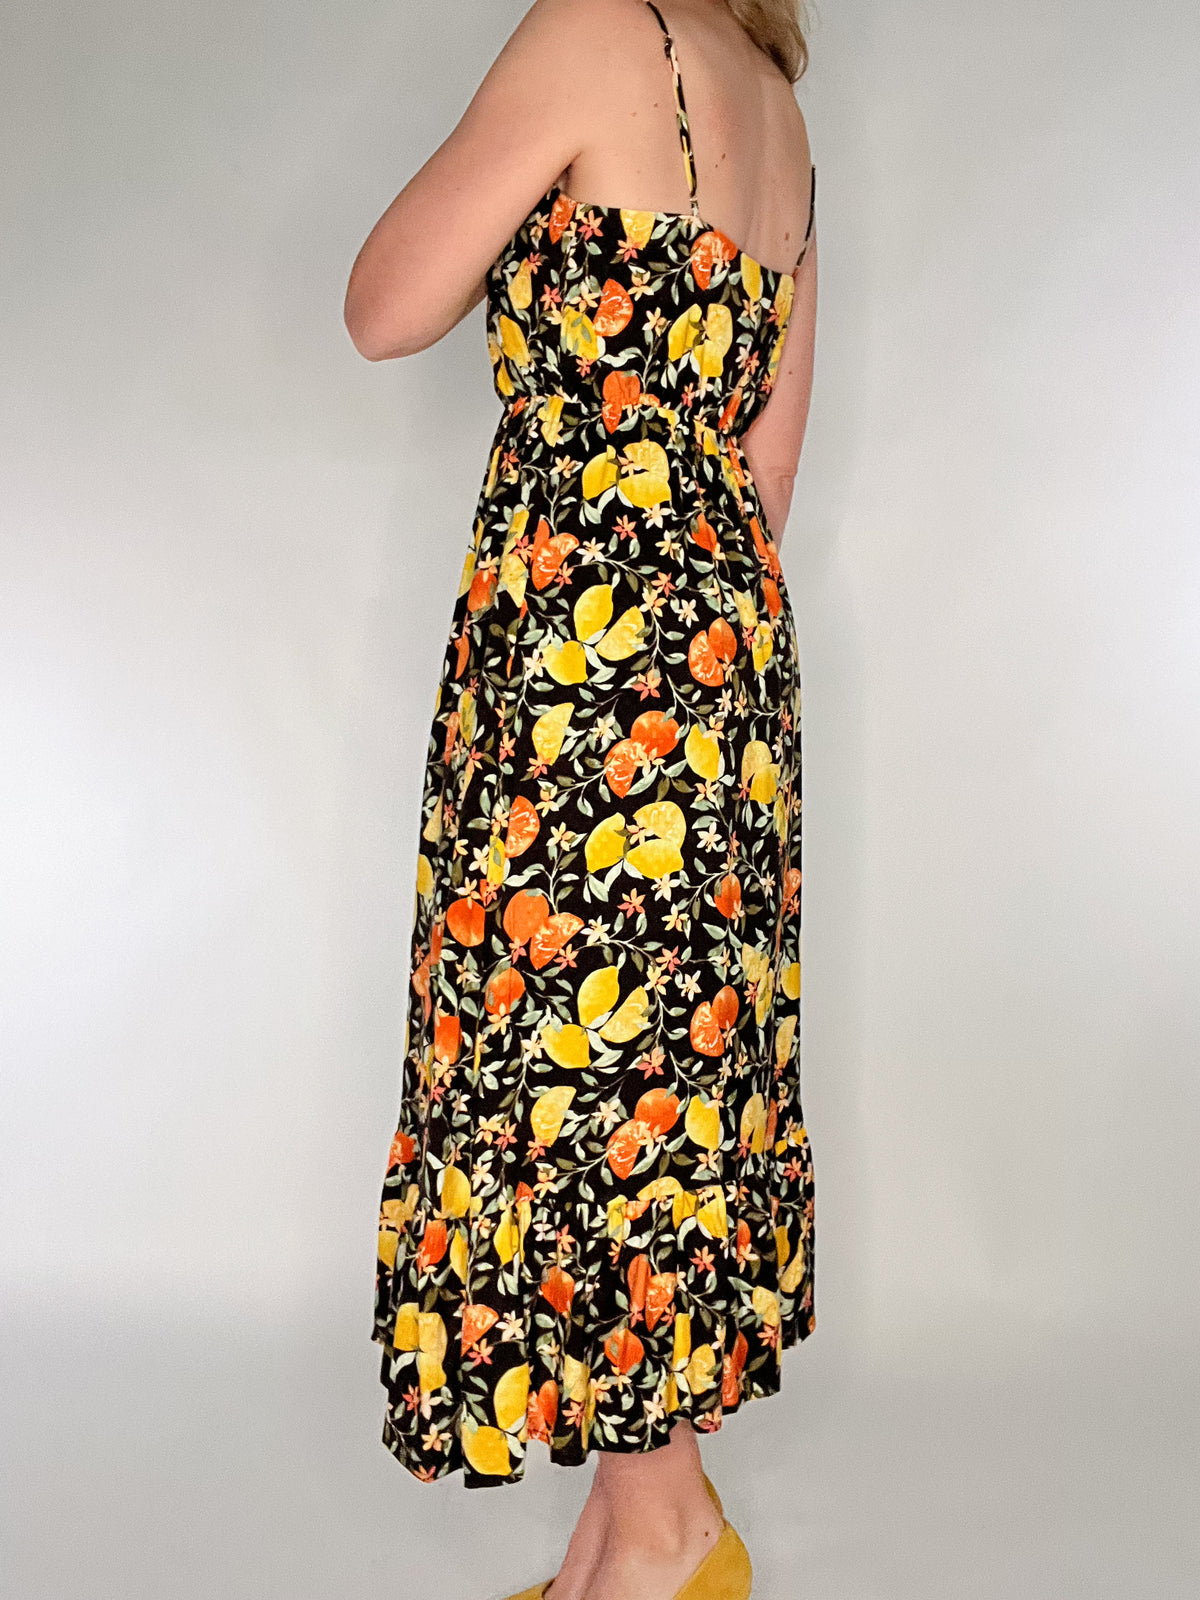 Make a bold statement in our Citrus Punch Maxi Dress. Featuring a playful citrus print, this adjustable spaghetti strap dress is perfect for any occasion. The tiered skirt adds a feminine touch while the button front and elastic waist provide a flattering fit. Fully lined to the knees for ultimate comfort and style.